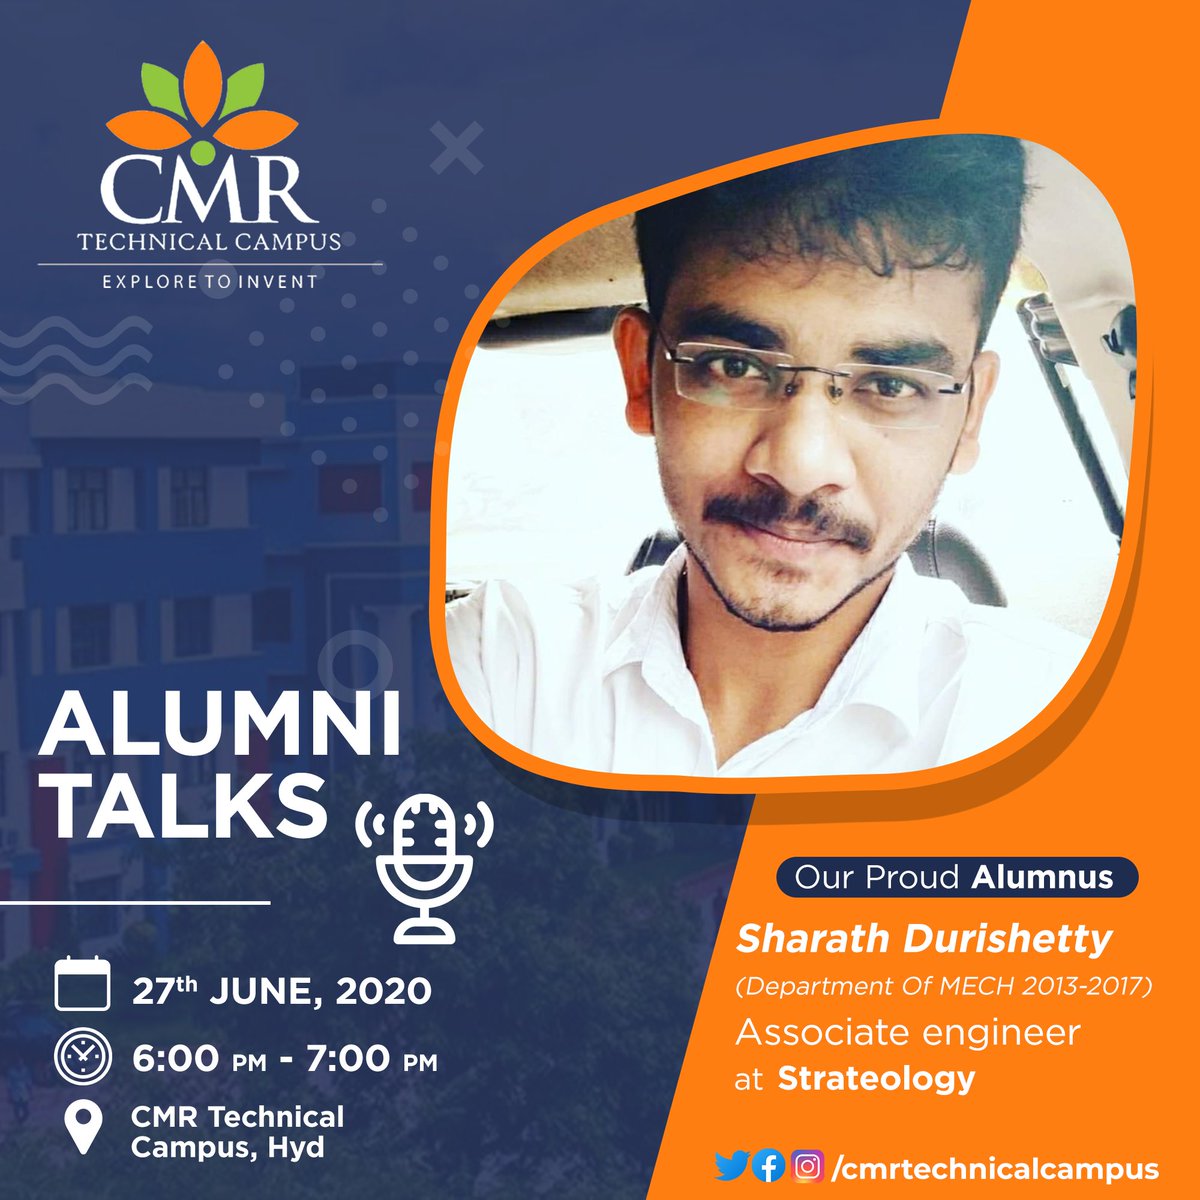 #AlumniTalks #CMRTechnicalcampus #DepartmentofMECH🔥

Presenting you the Speaker for Alumni Talks
Sharath Durishetty, Associate Engineer at Strateology

Join the CMR Technical Campus Facebook Page Live at 6:00 PM ✅

#CMRTechnicalCampus #VirtualAlumniConnect